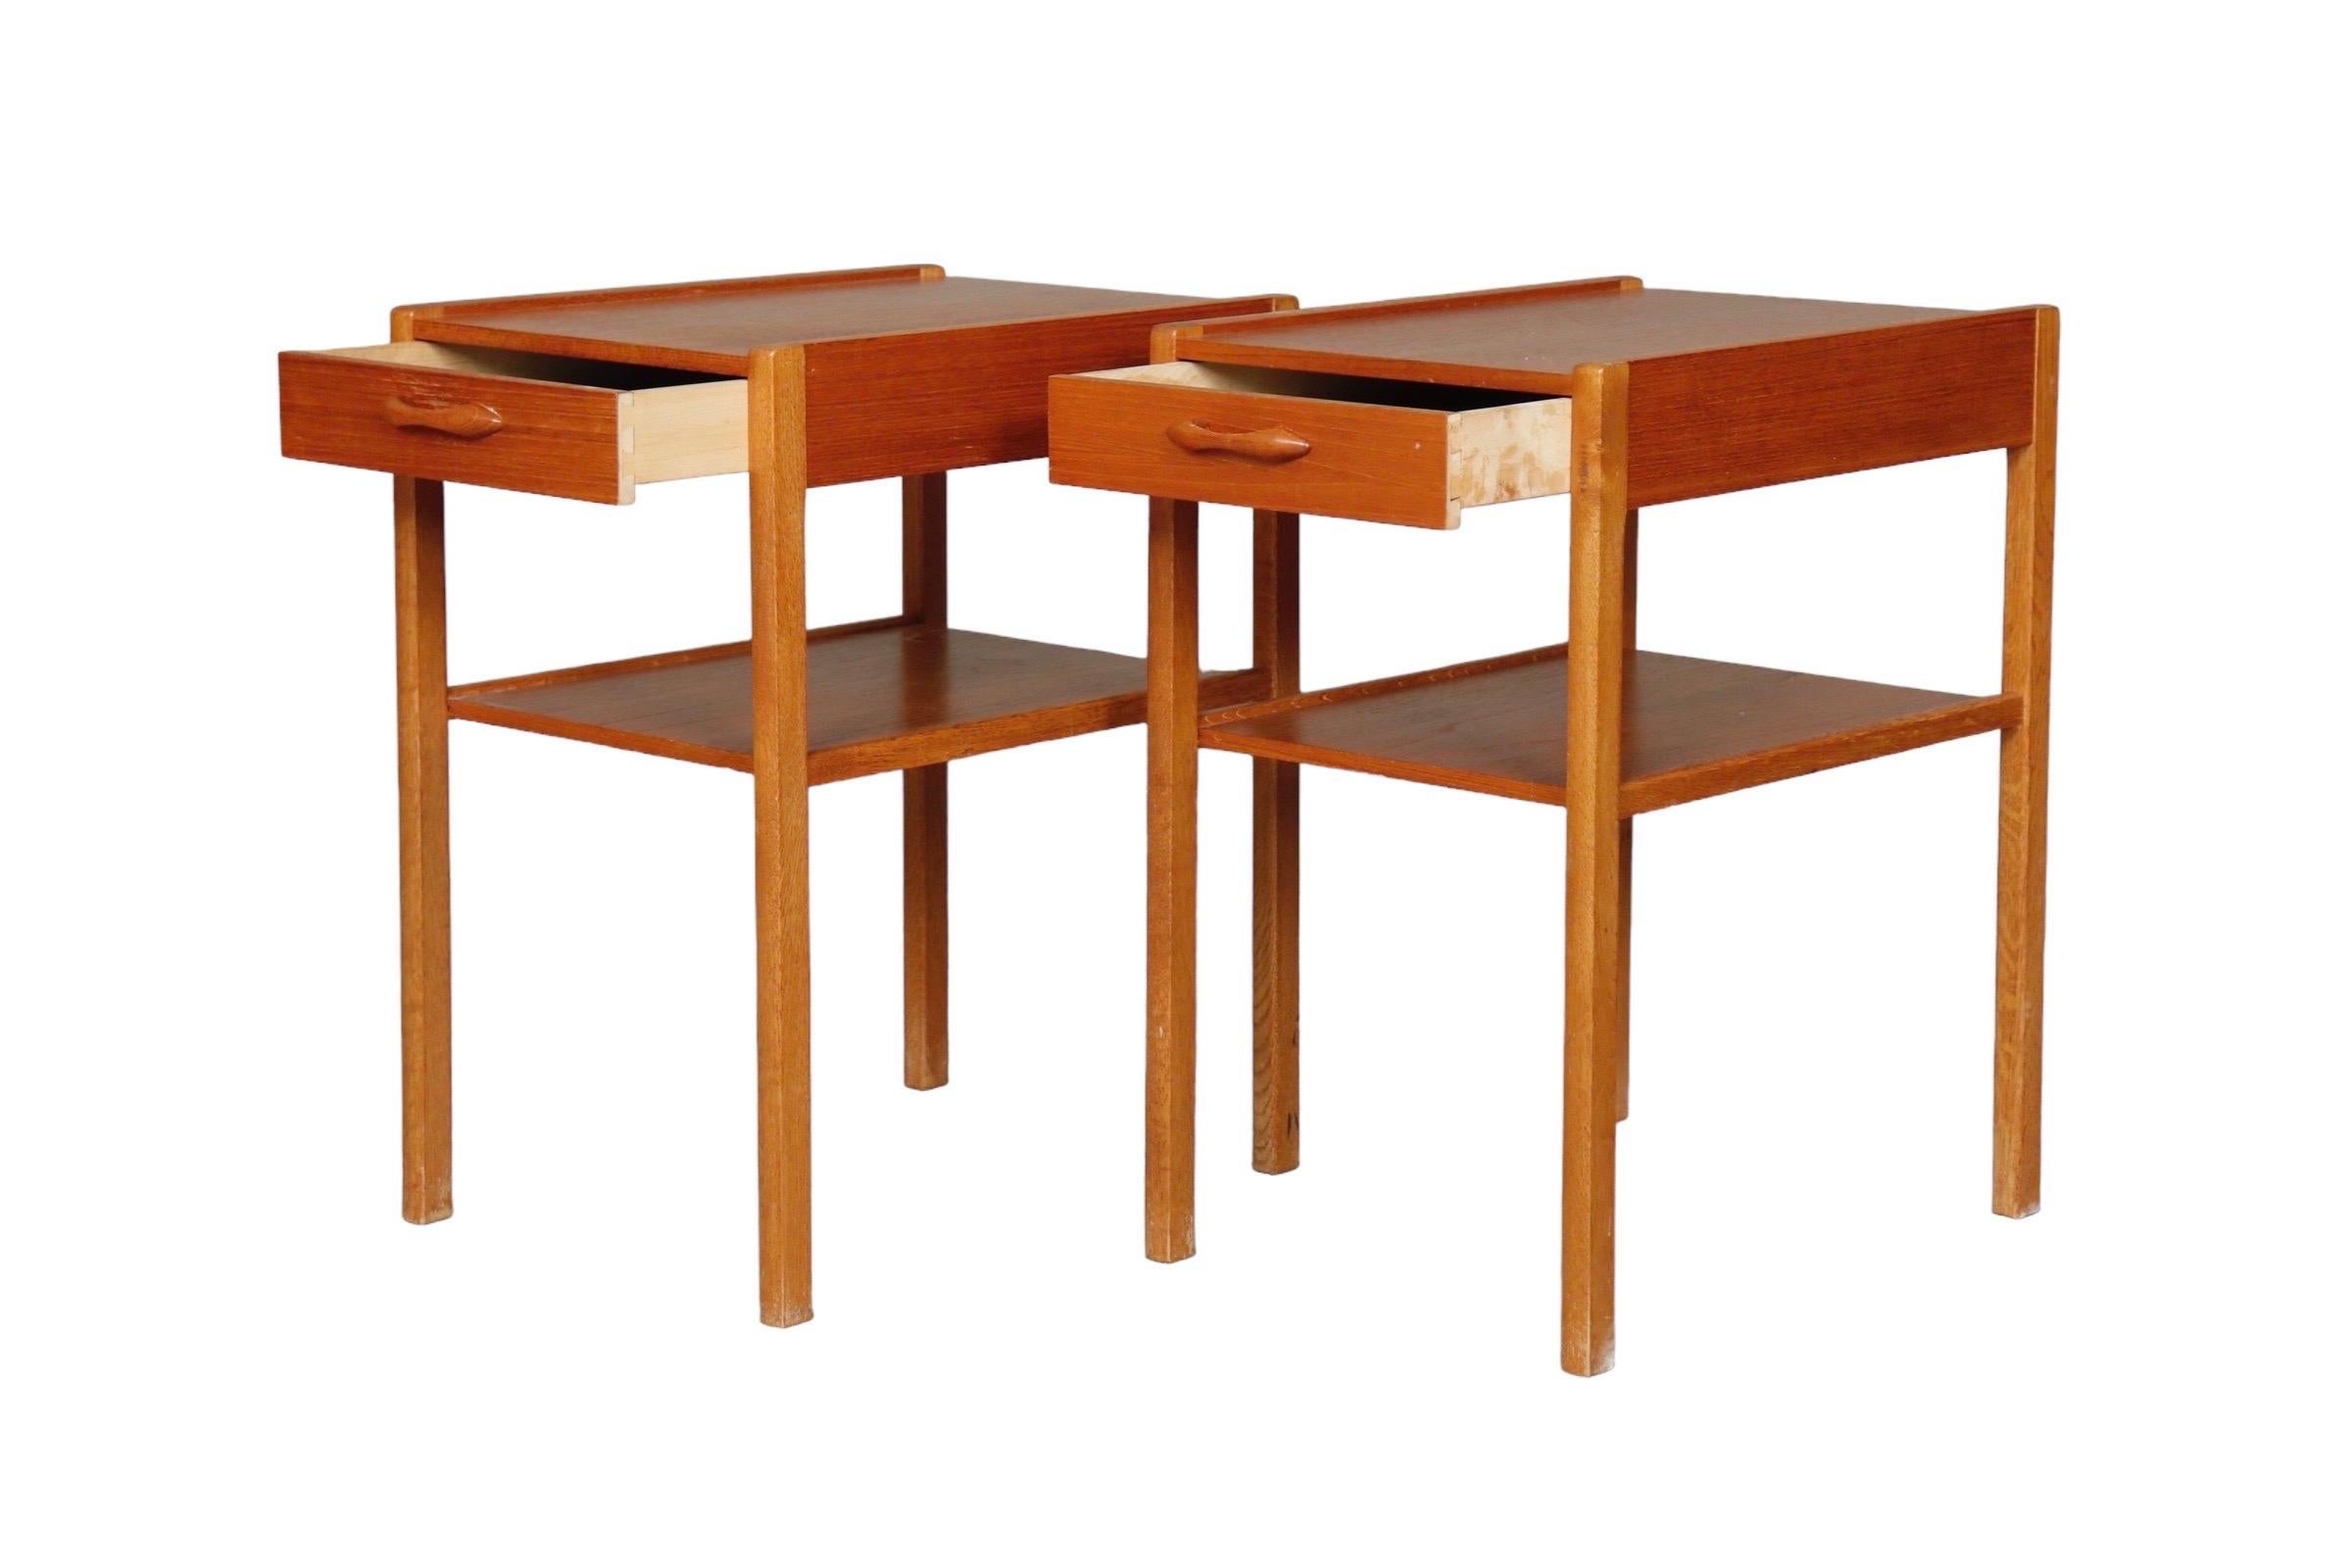 A pair of mid century end tables or night stands made of teak. Each has a single dovetailed drawer that opens with a carved bar handle. Straight legs are supported with a shelf.

Measures: L:12.5”
D:17.25”
H:21.5”.